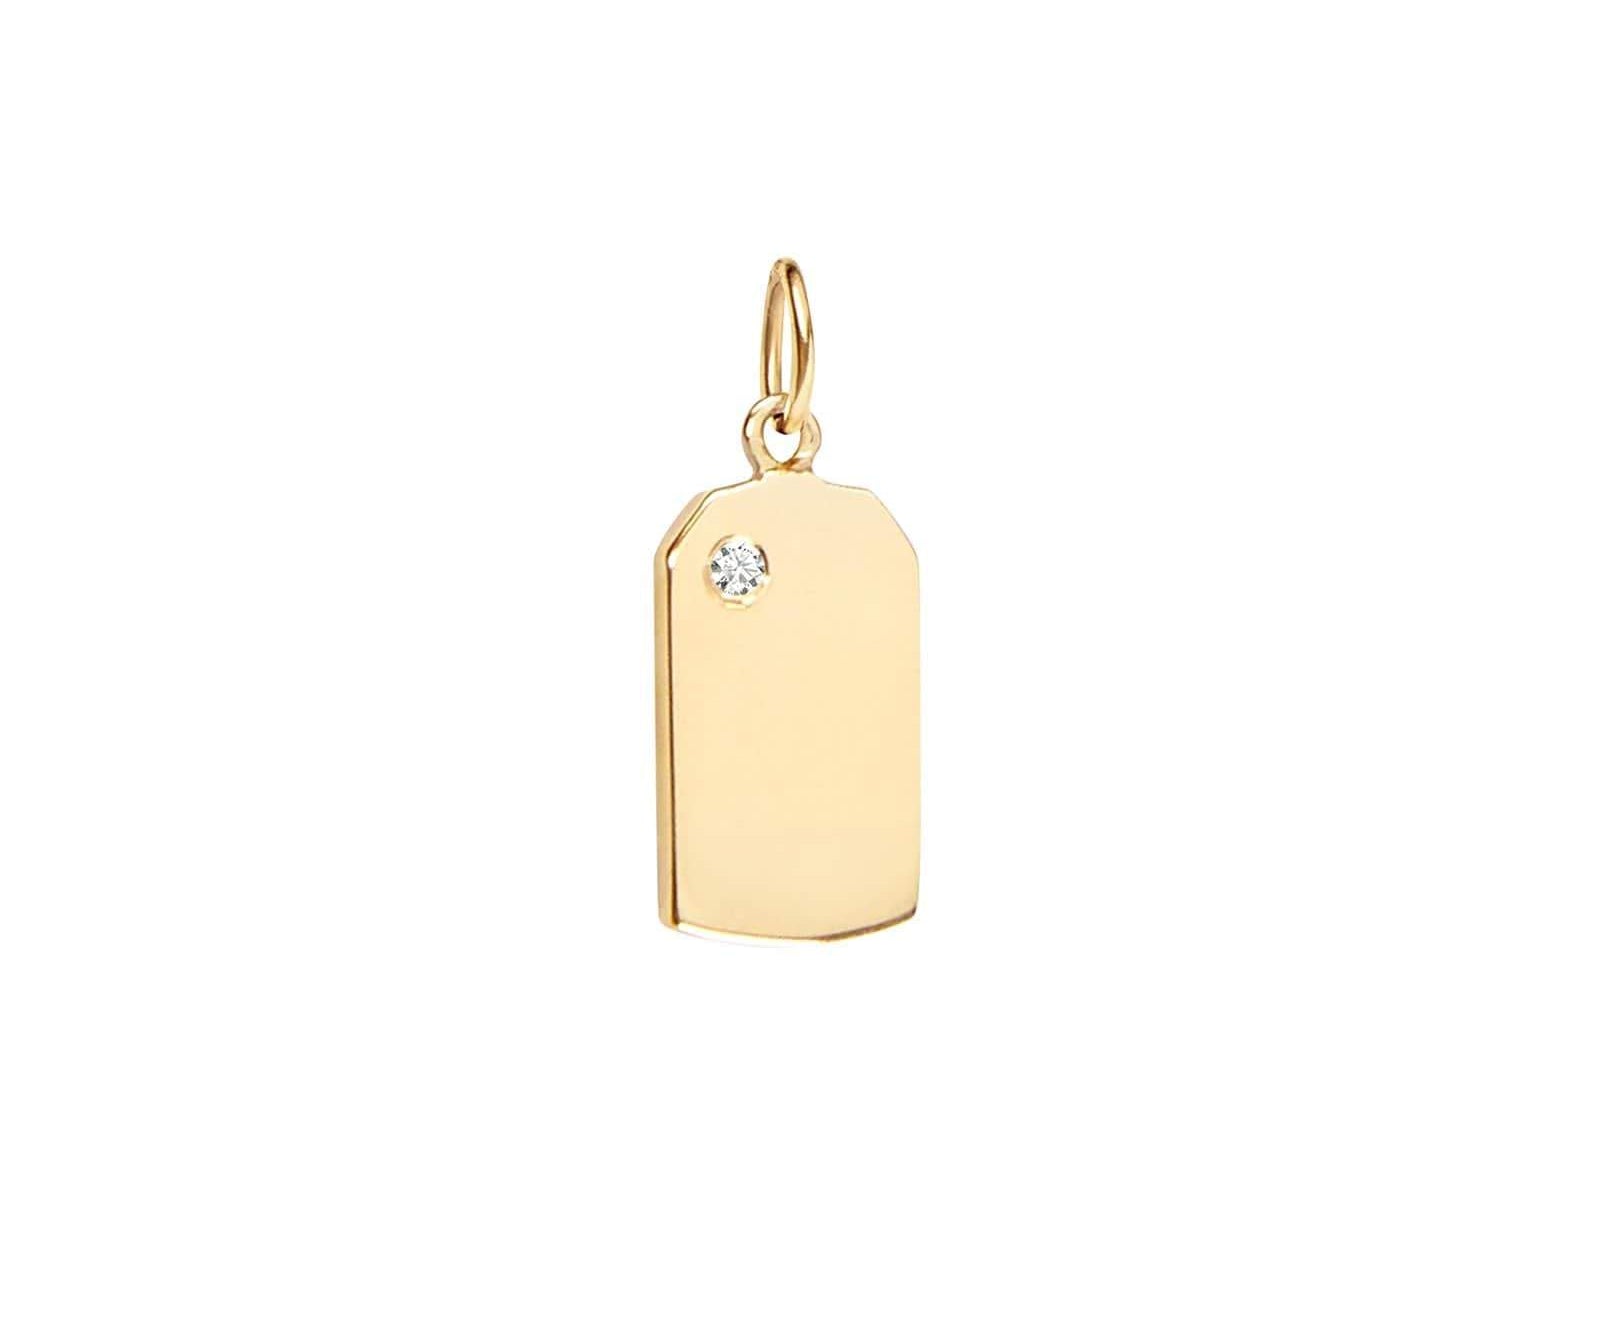 Picture of Luna Rae Solid 9k Gold Luminous Necklace